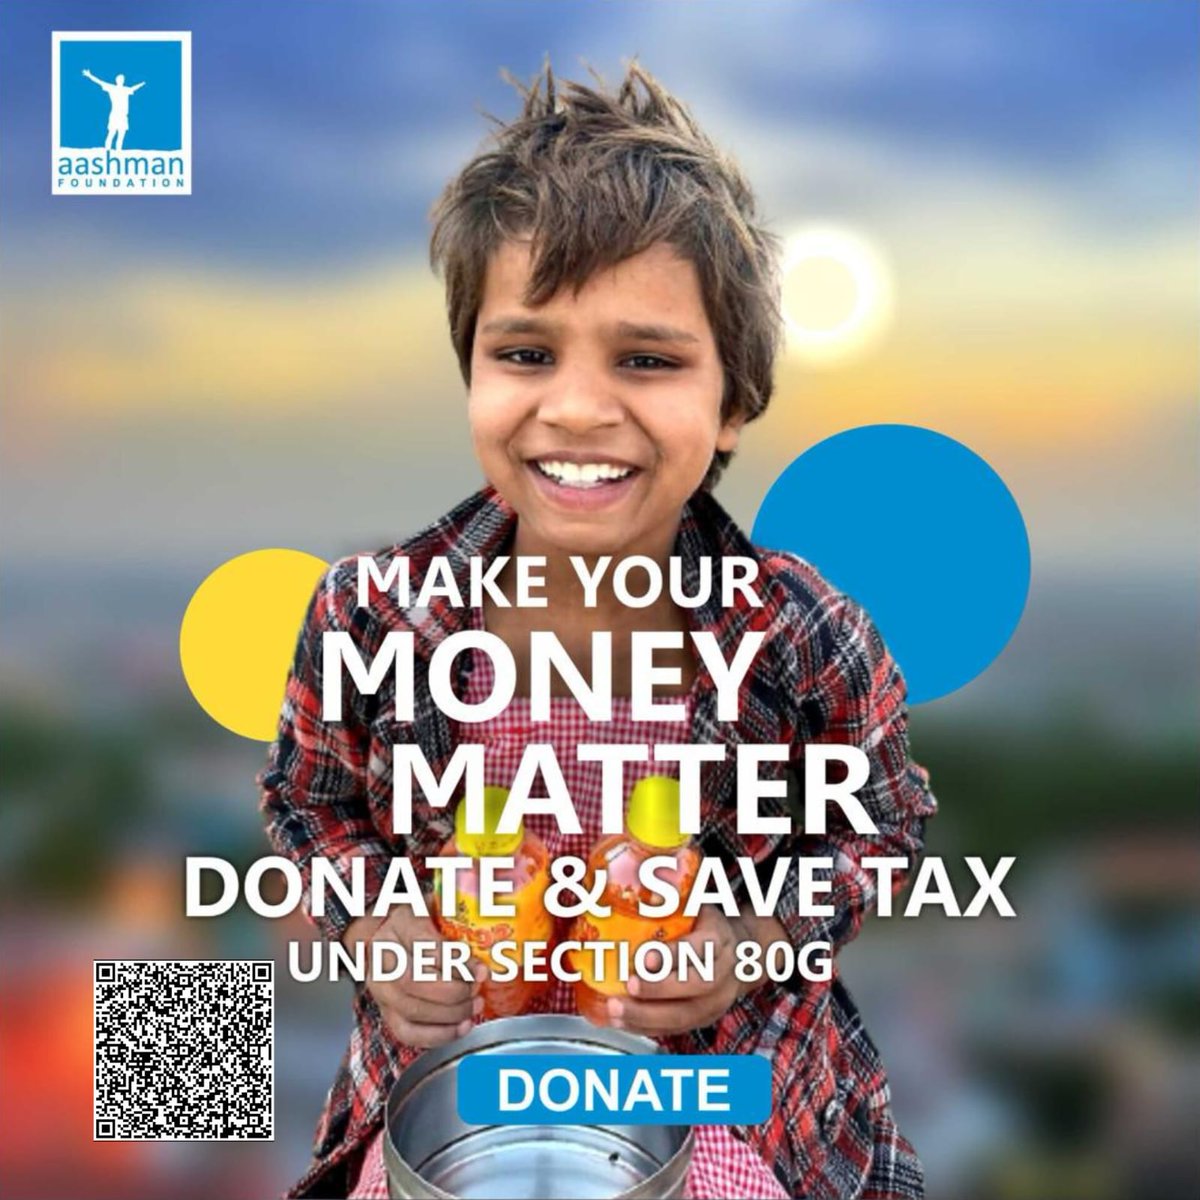 Change lives with @aashmanfoundation 💙 
Triple benefits of your contribution ✅
1️⃣ Support for Children from Slums
2️⃣ Hunger free education ✅
3️⃣ 50% tax exemption ✅
Donate to #AashmanFoundation and save tax.
#aashman4u #taxexemption #80G #taxbenefits #vjaman #ngo #charity